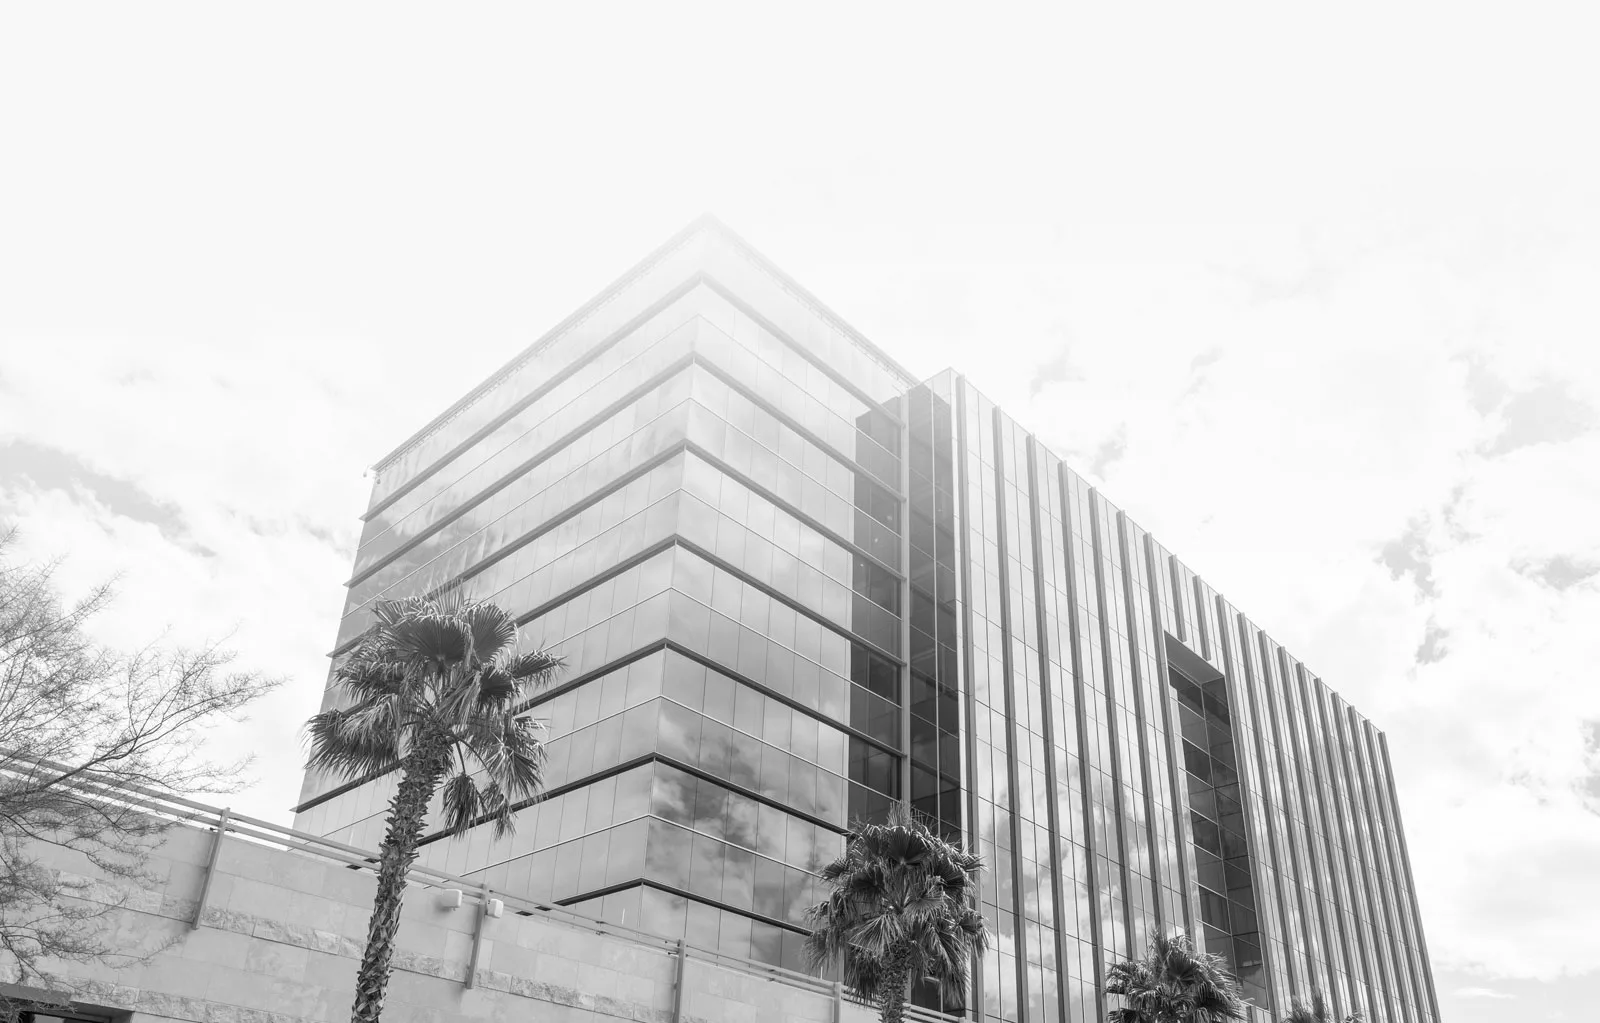 A unique bottom-up perspective of the base and capital of an imposing office building, framed by palm trees on the outside, conveying a sense of architectural grandeur and tropical elegance.